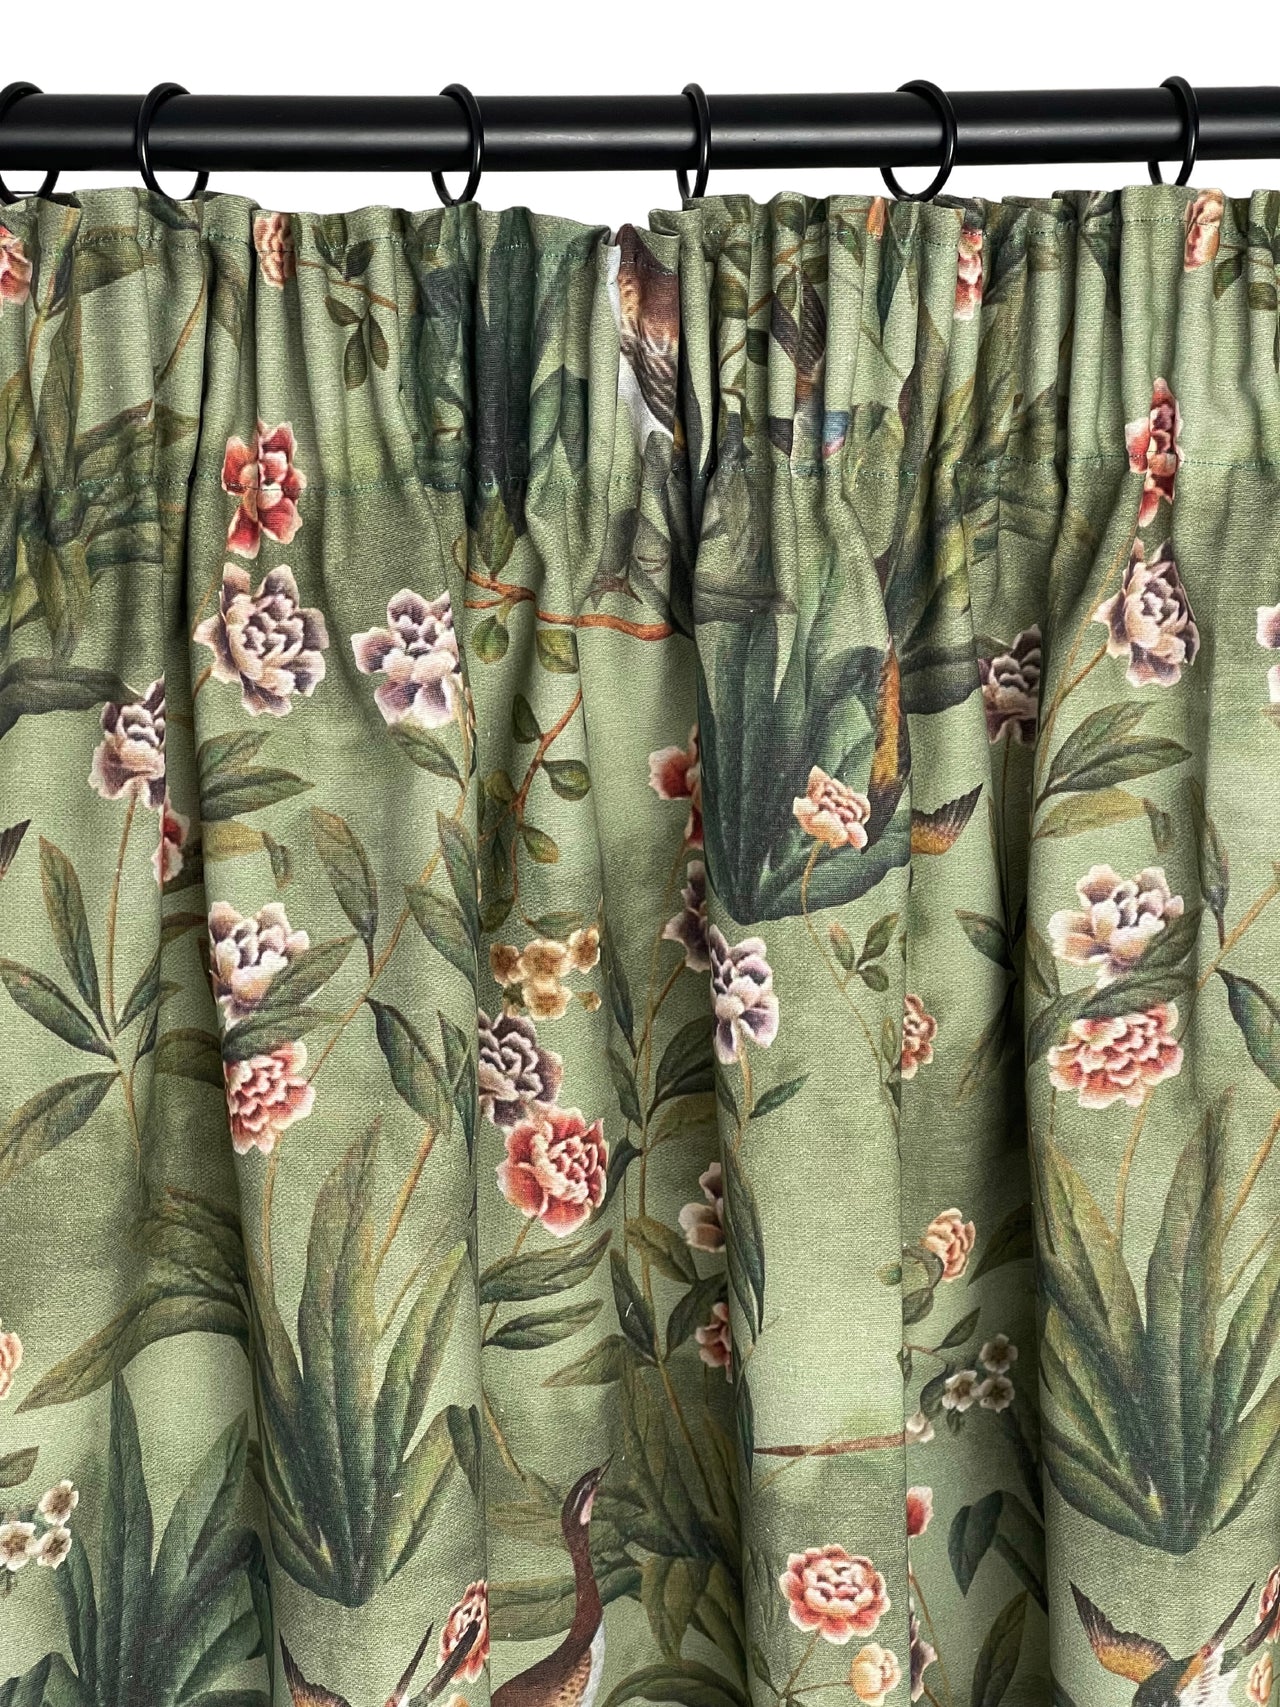 Vintage-Style Goose Botanical Cotton Pair of Curtains - Custom Made to Measure